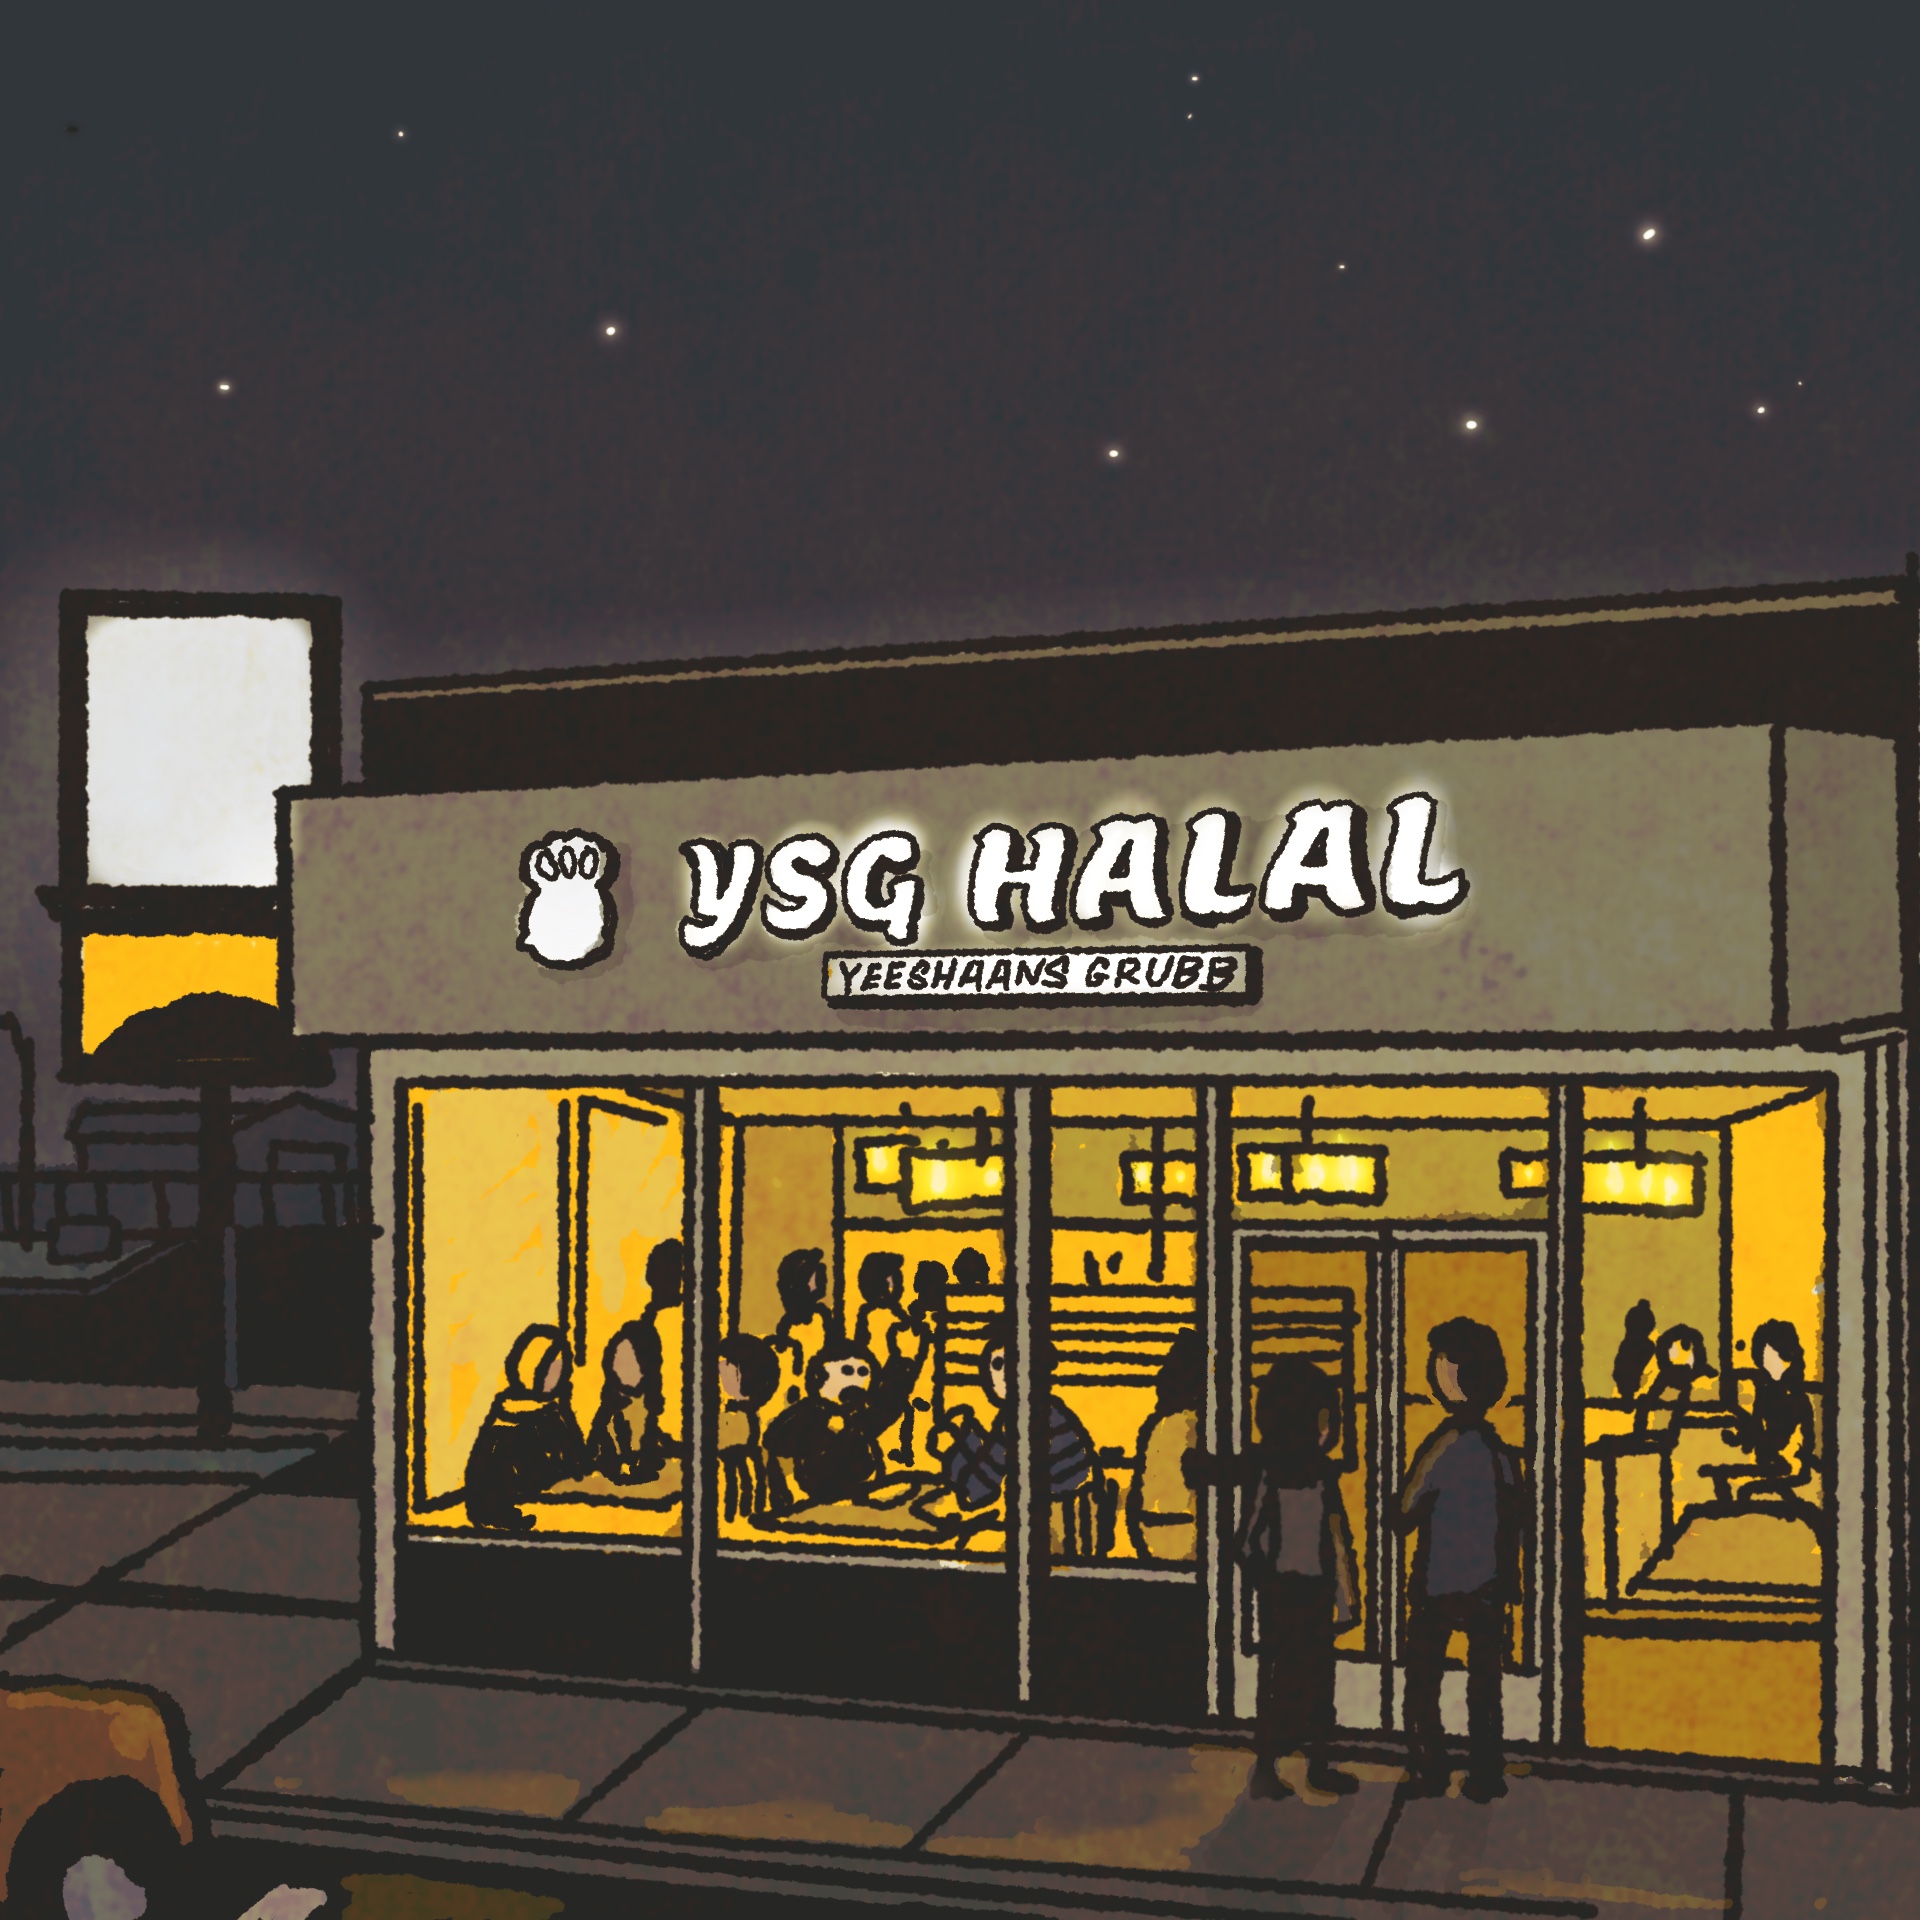 Illustration of a restaurant exterior late at night: It's a small burger shop crowded with customers and lit up from within. The sign reads "YSG Halal YeeShaans Grubb."